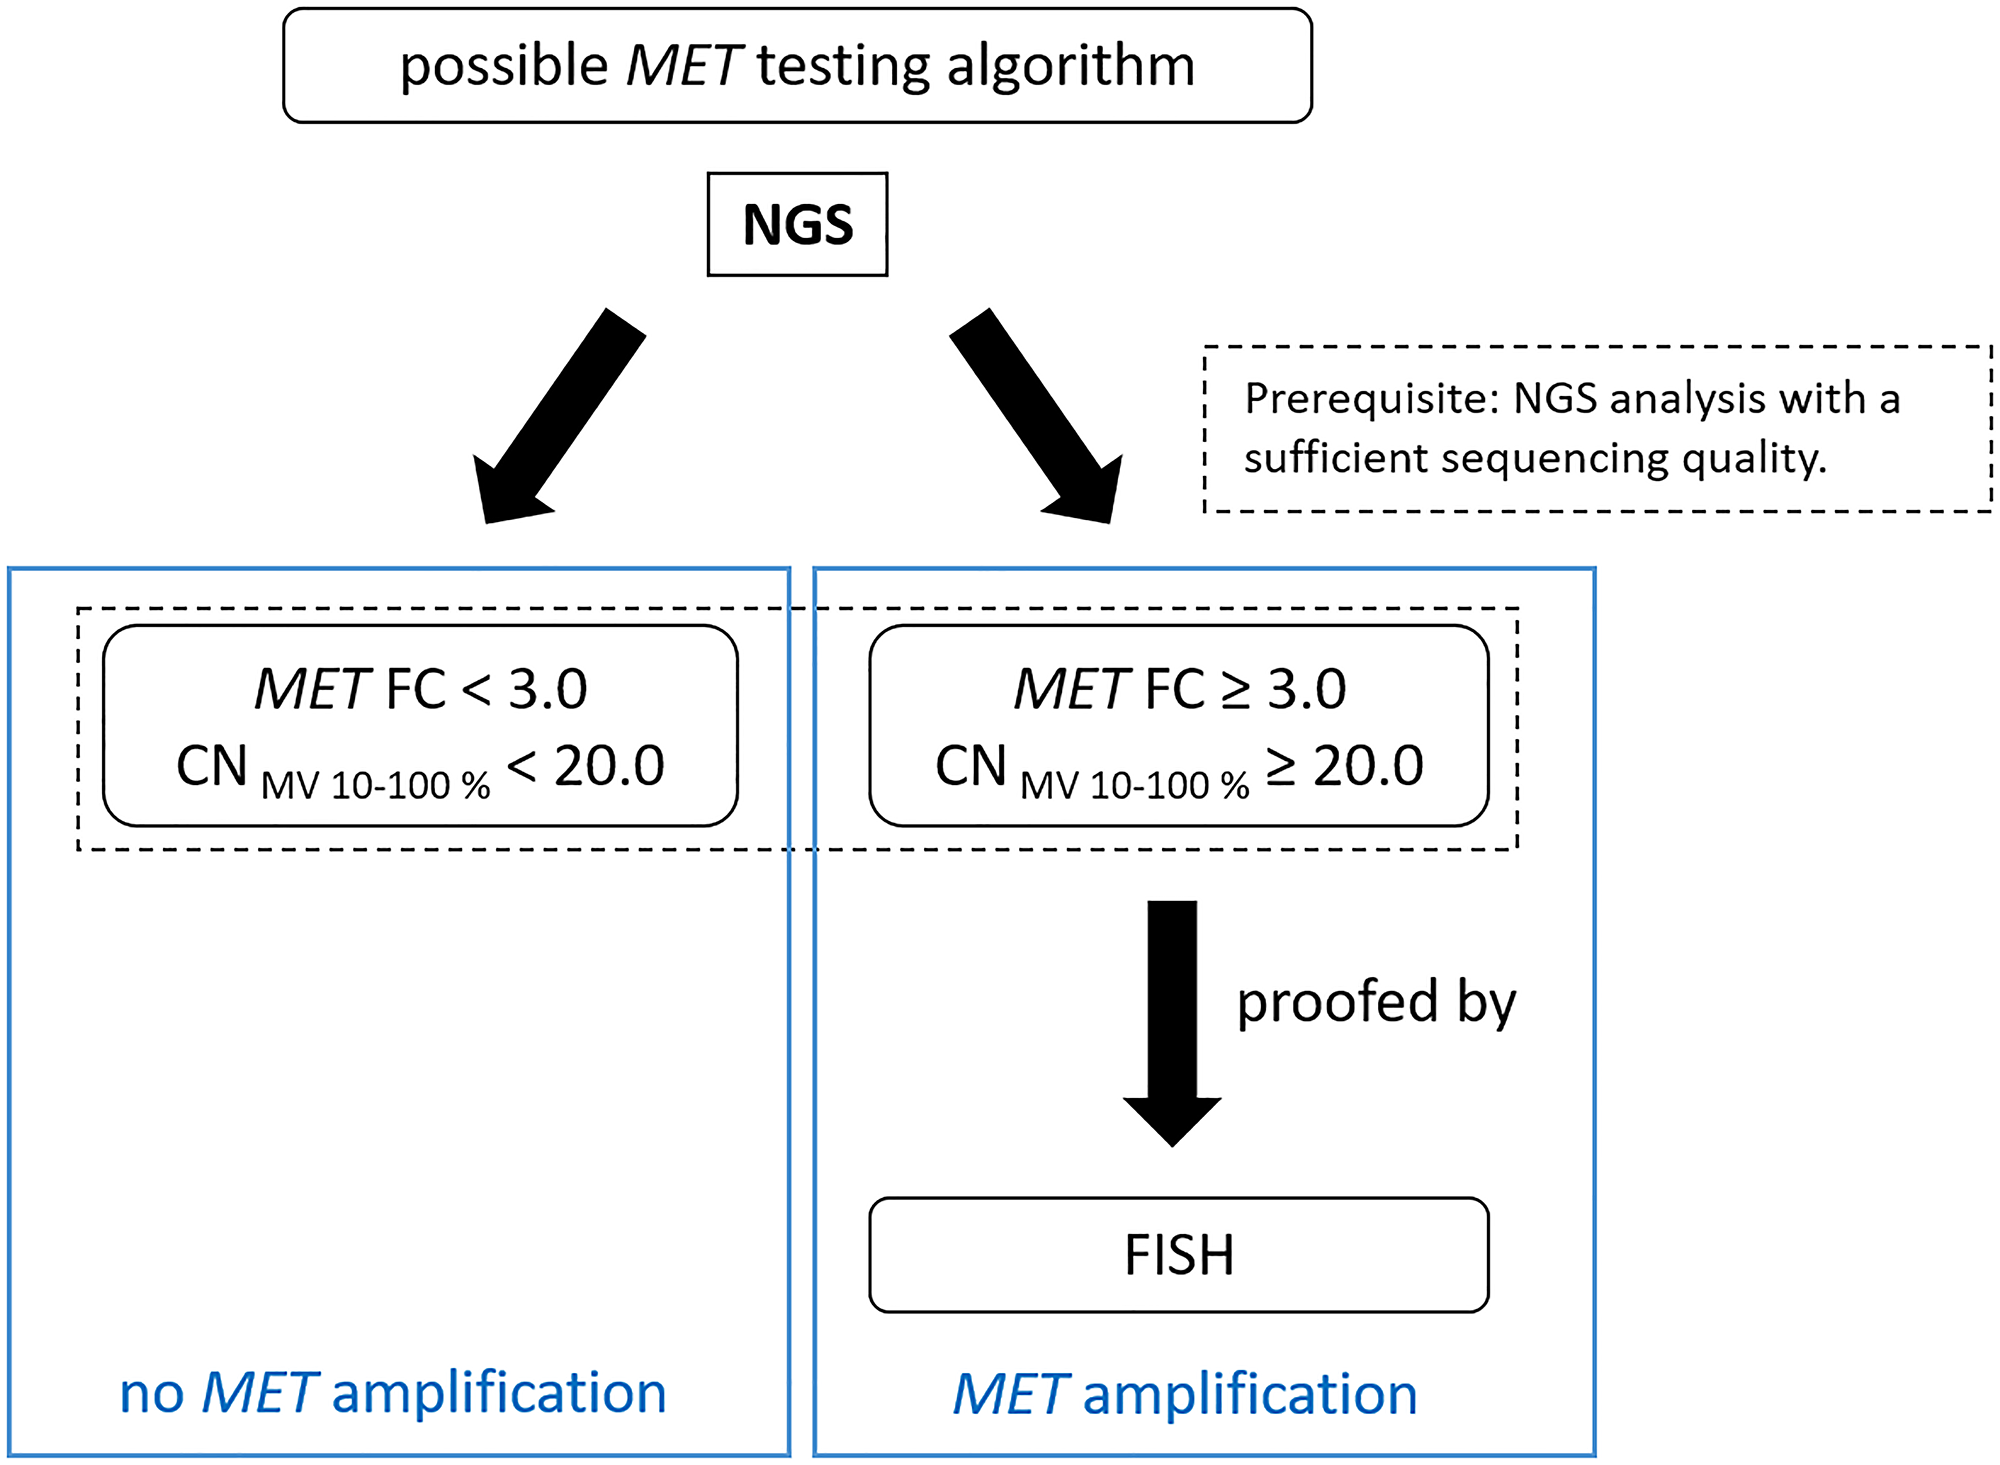 Suggested testing workflow for the detection of MET amplifications by QIAGEN workflow.